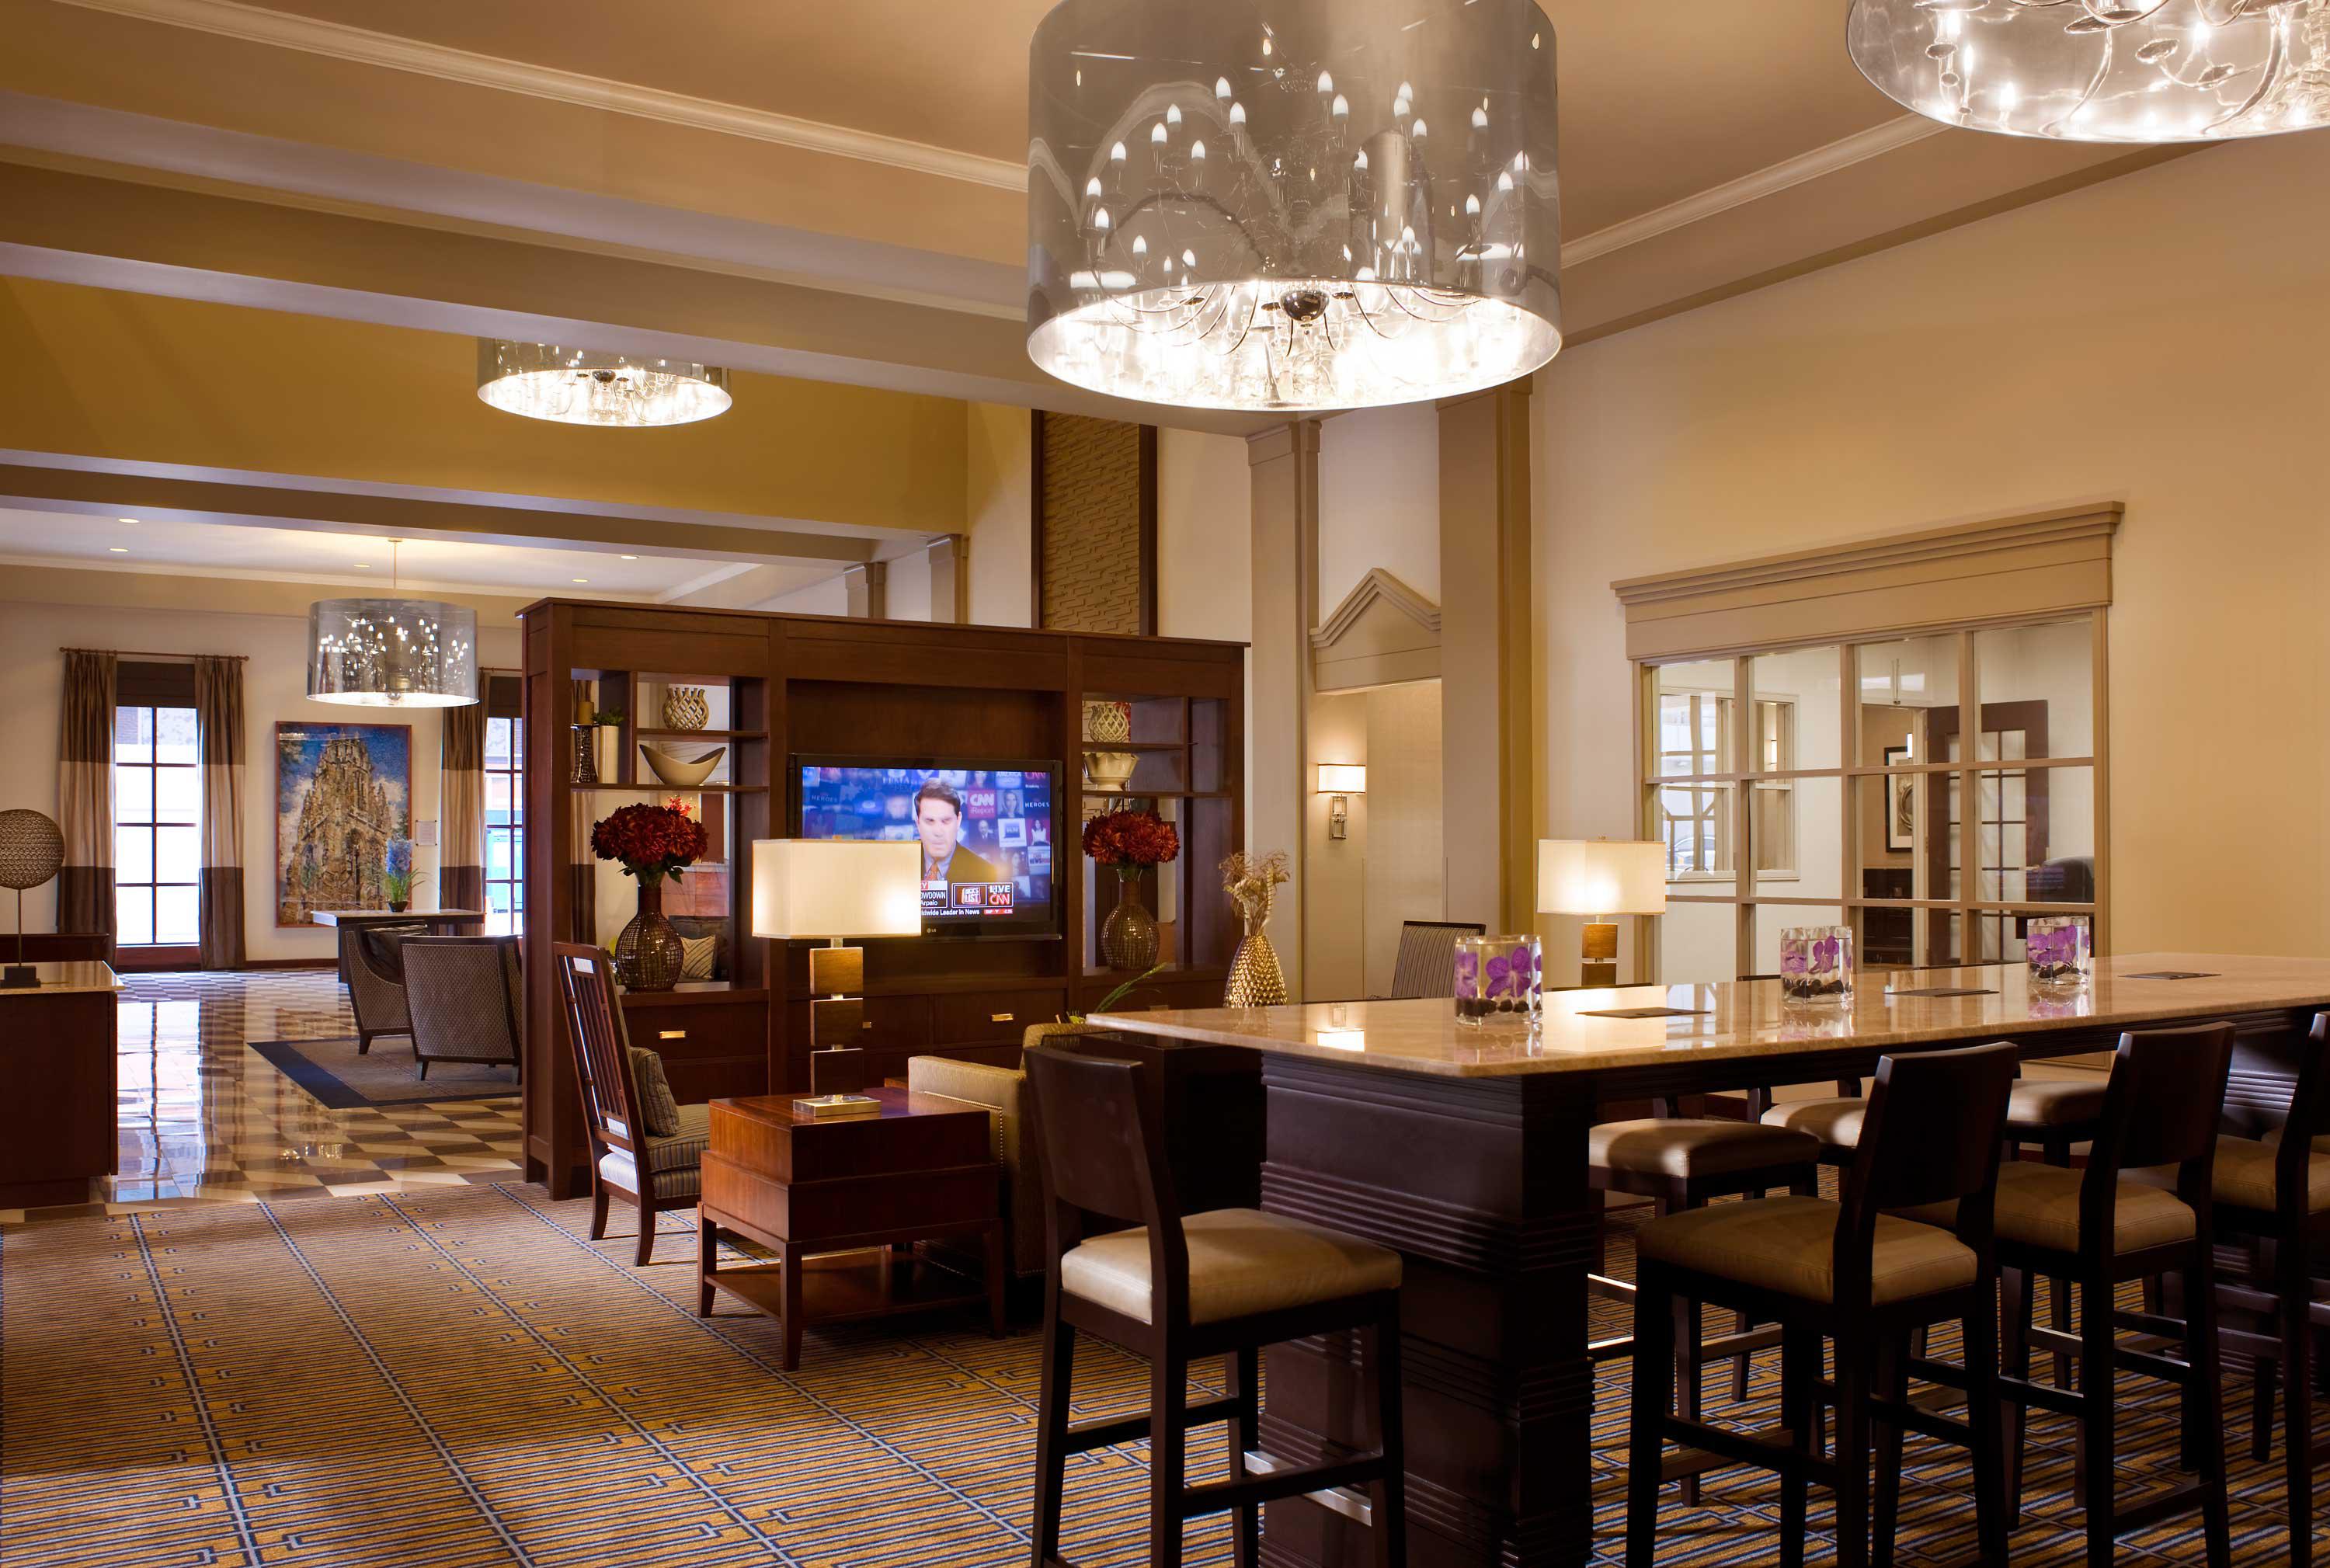 Plenty of space to do work, socialize, or just relax in comfort and safety in our New Haven hotel lobby.